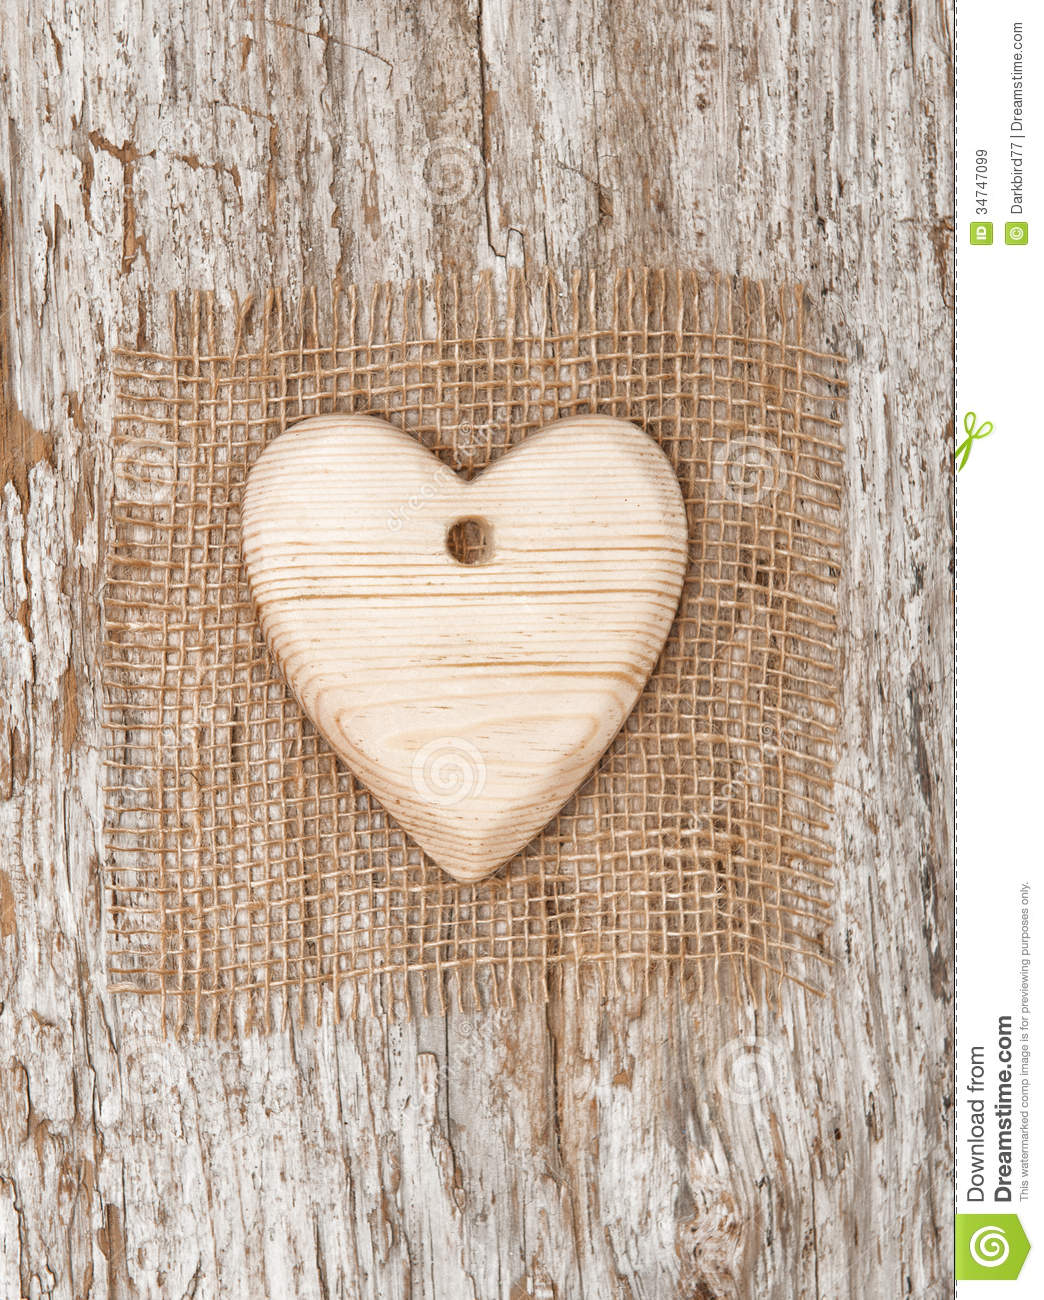 Wooden Heart With Burlap Textile On The Old Wood Royalty Free Stock